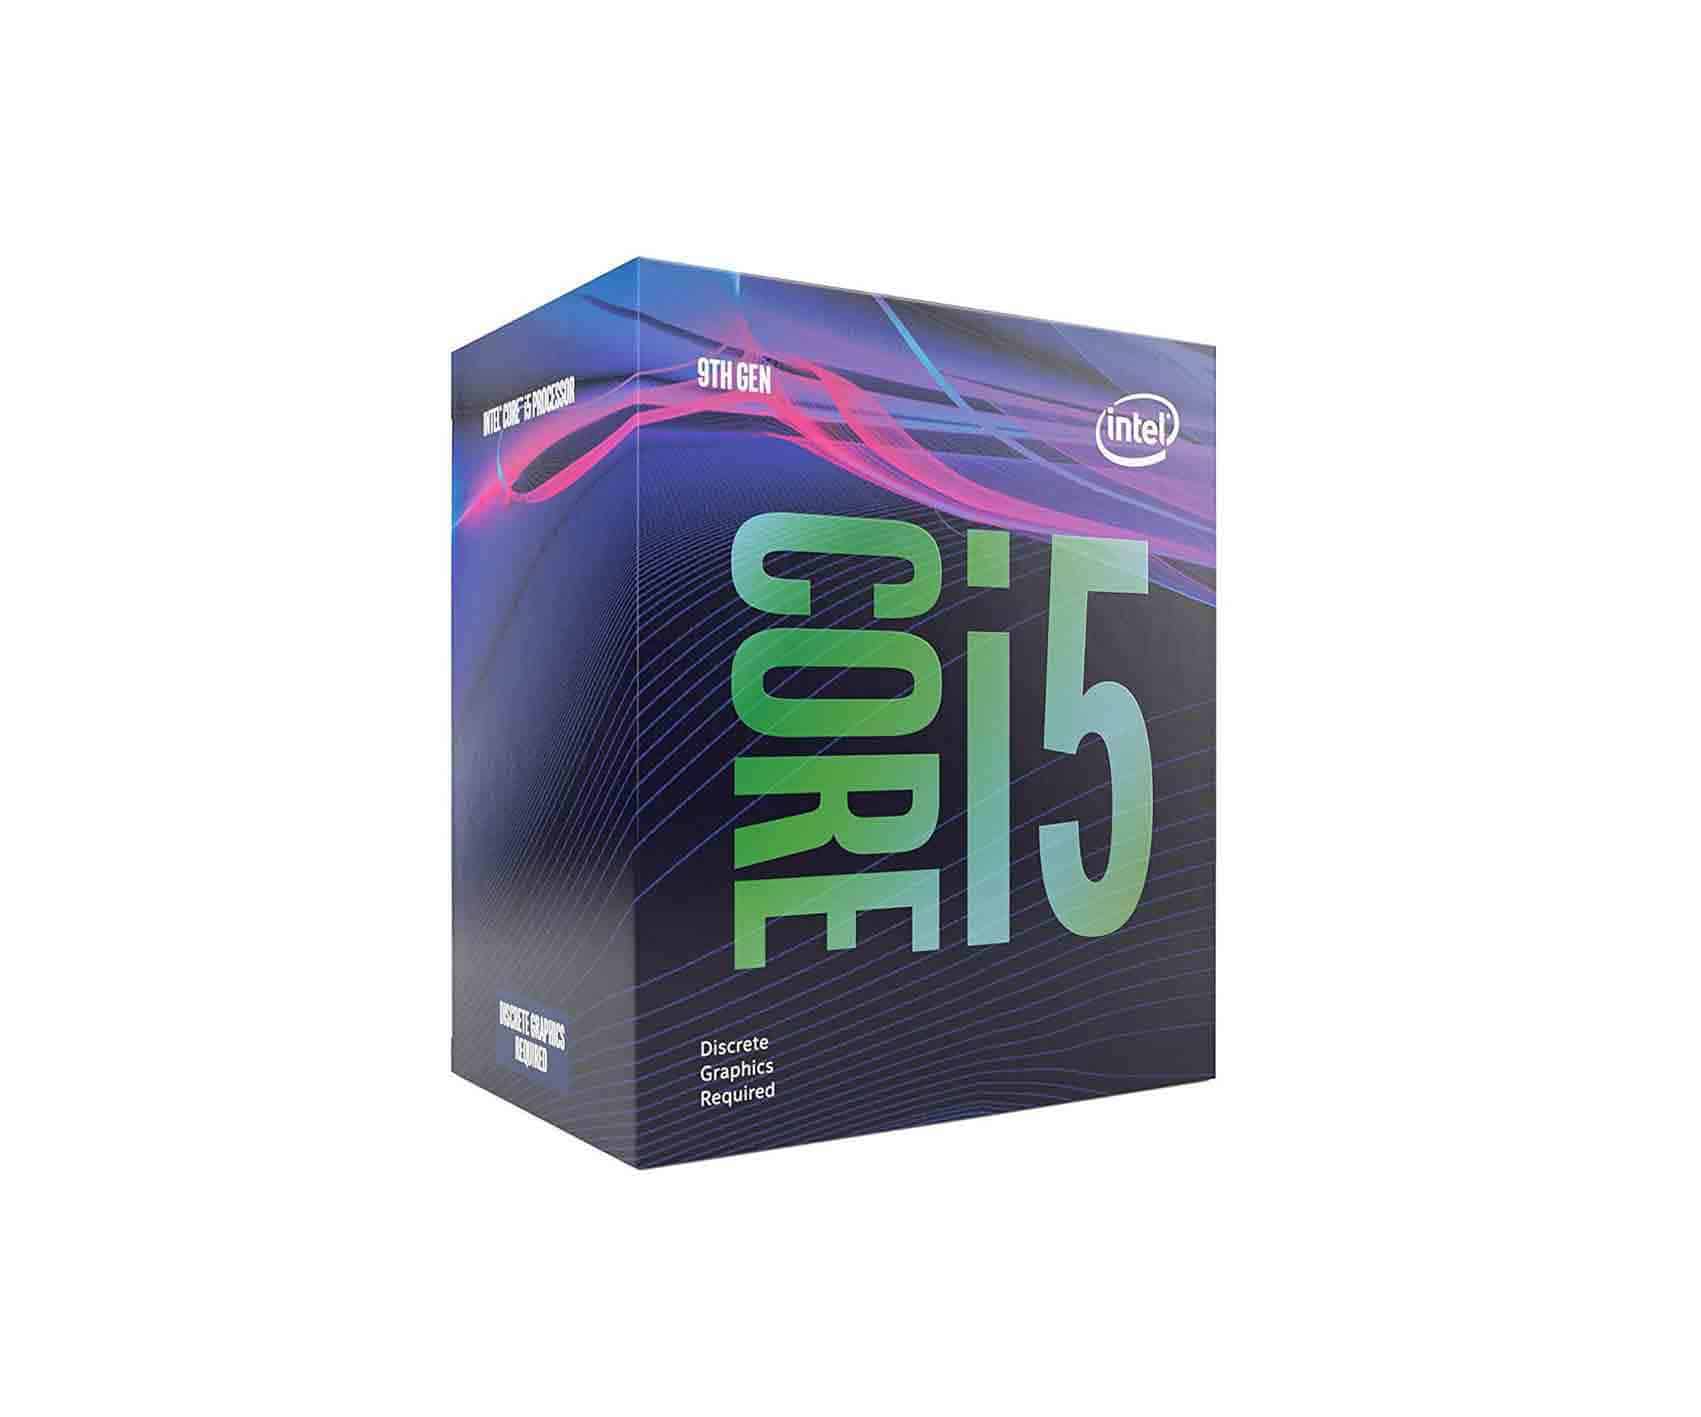 Intel Core i5-9400F Best CPU for Gaming Under $300 in 2020 